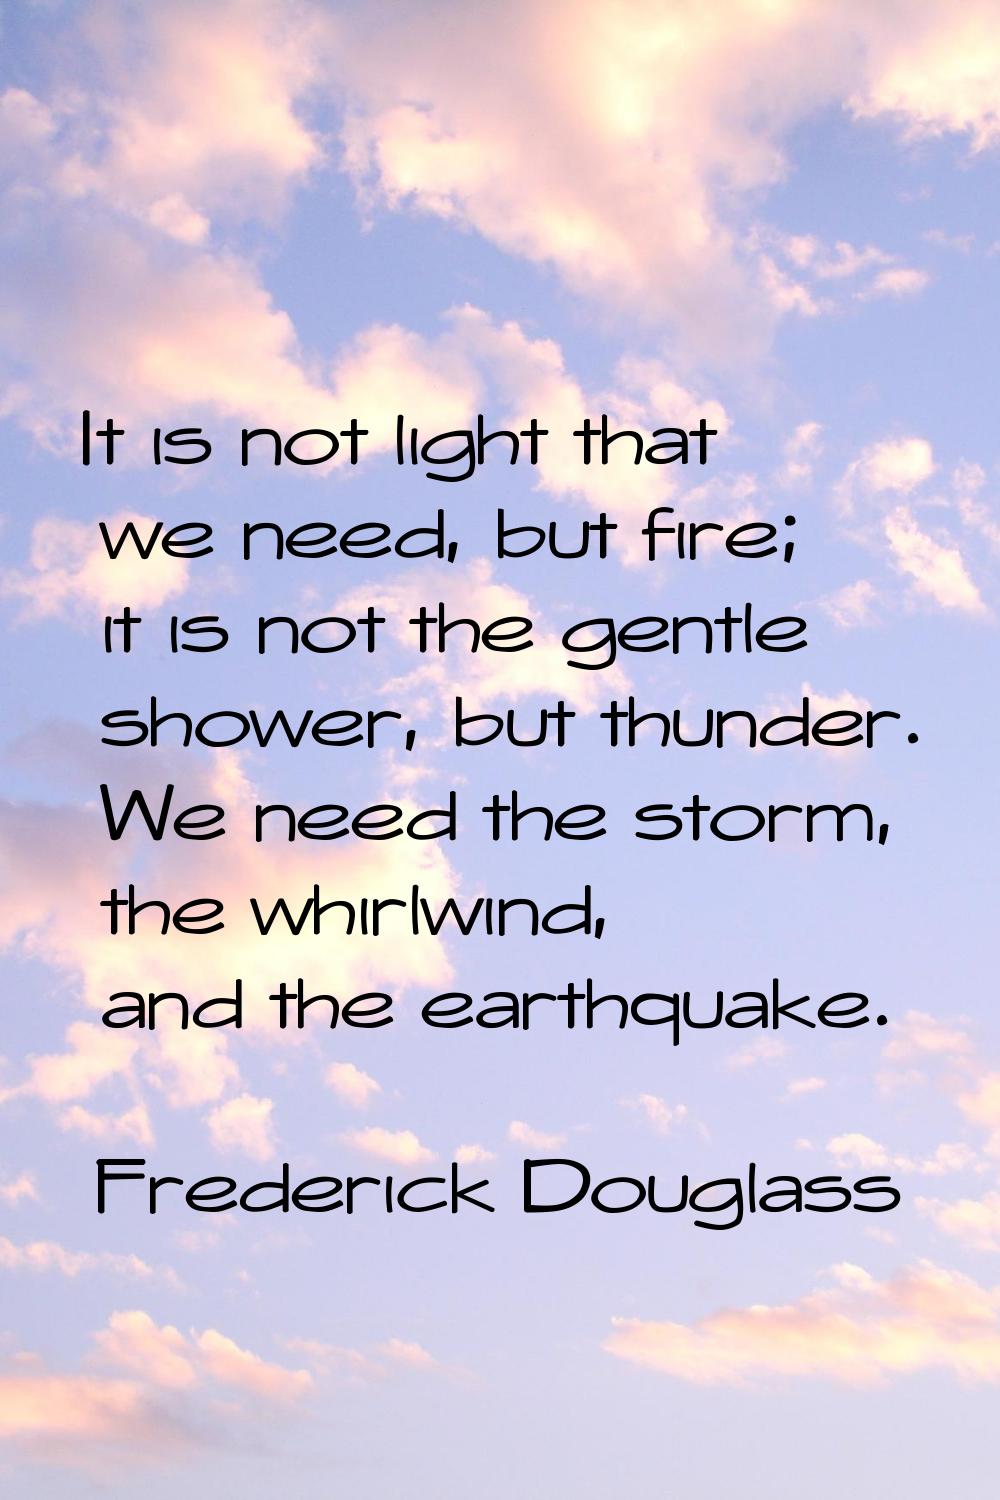 It is not light that we need, but fire; it is not the gentle shower, but thunder. We need the storm